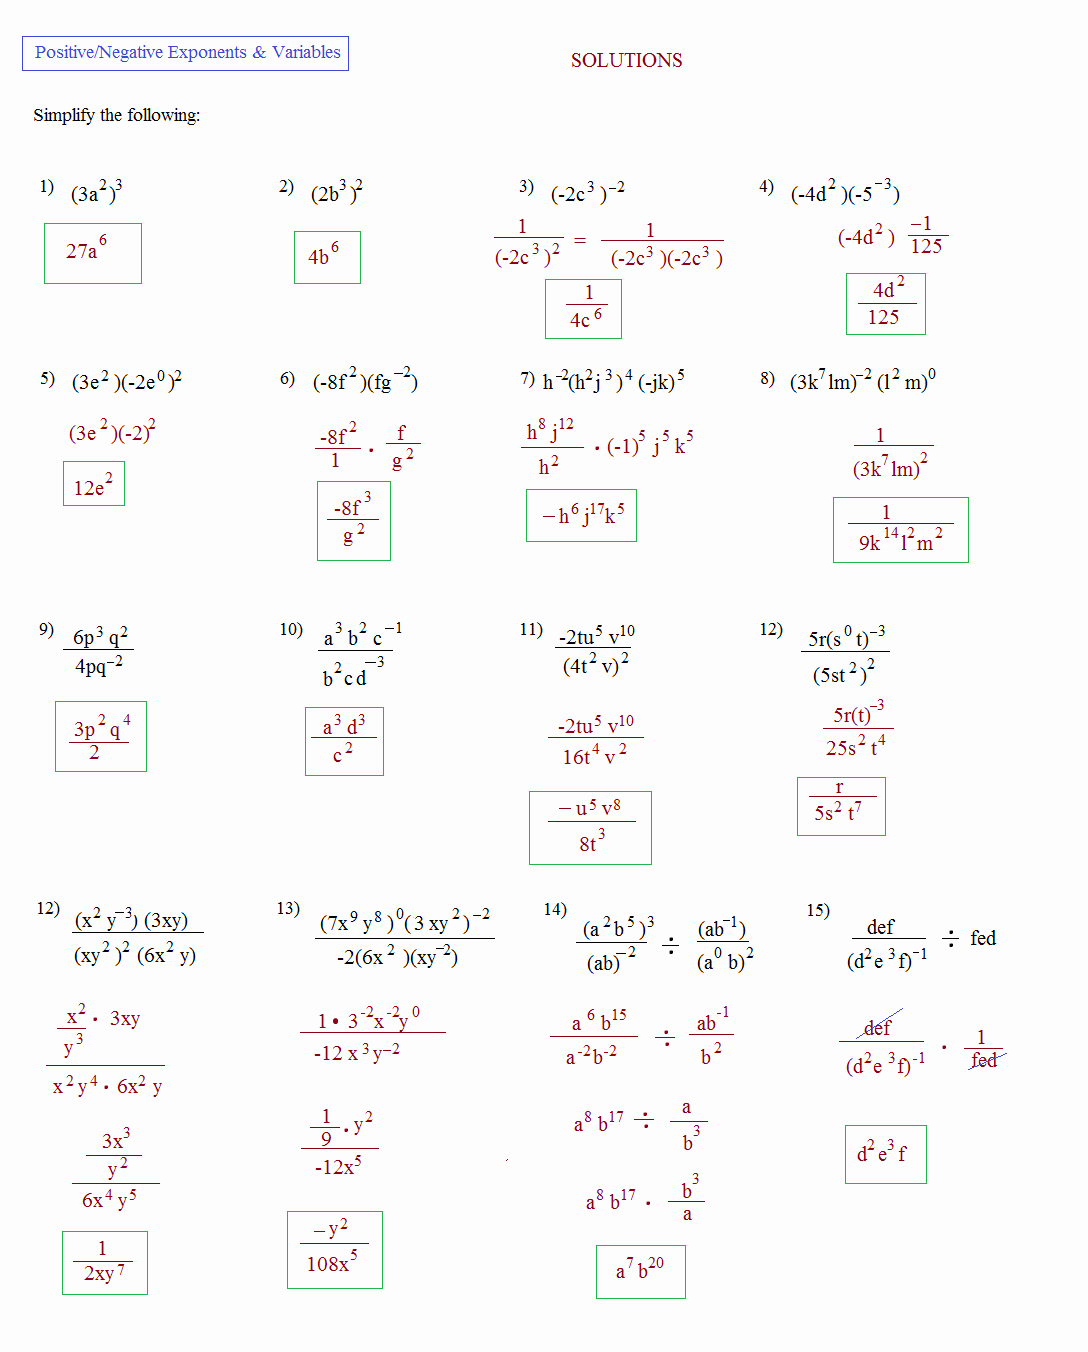 Simplify Exponential Expressions Worksheet Fresh Math Plane Simplifying Negative Exponents and Variables